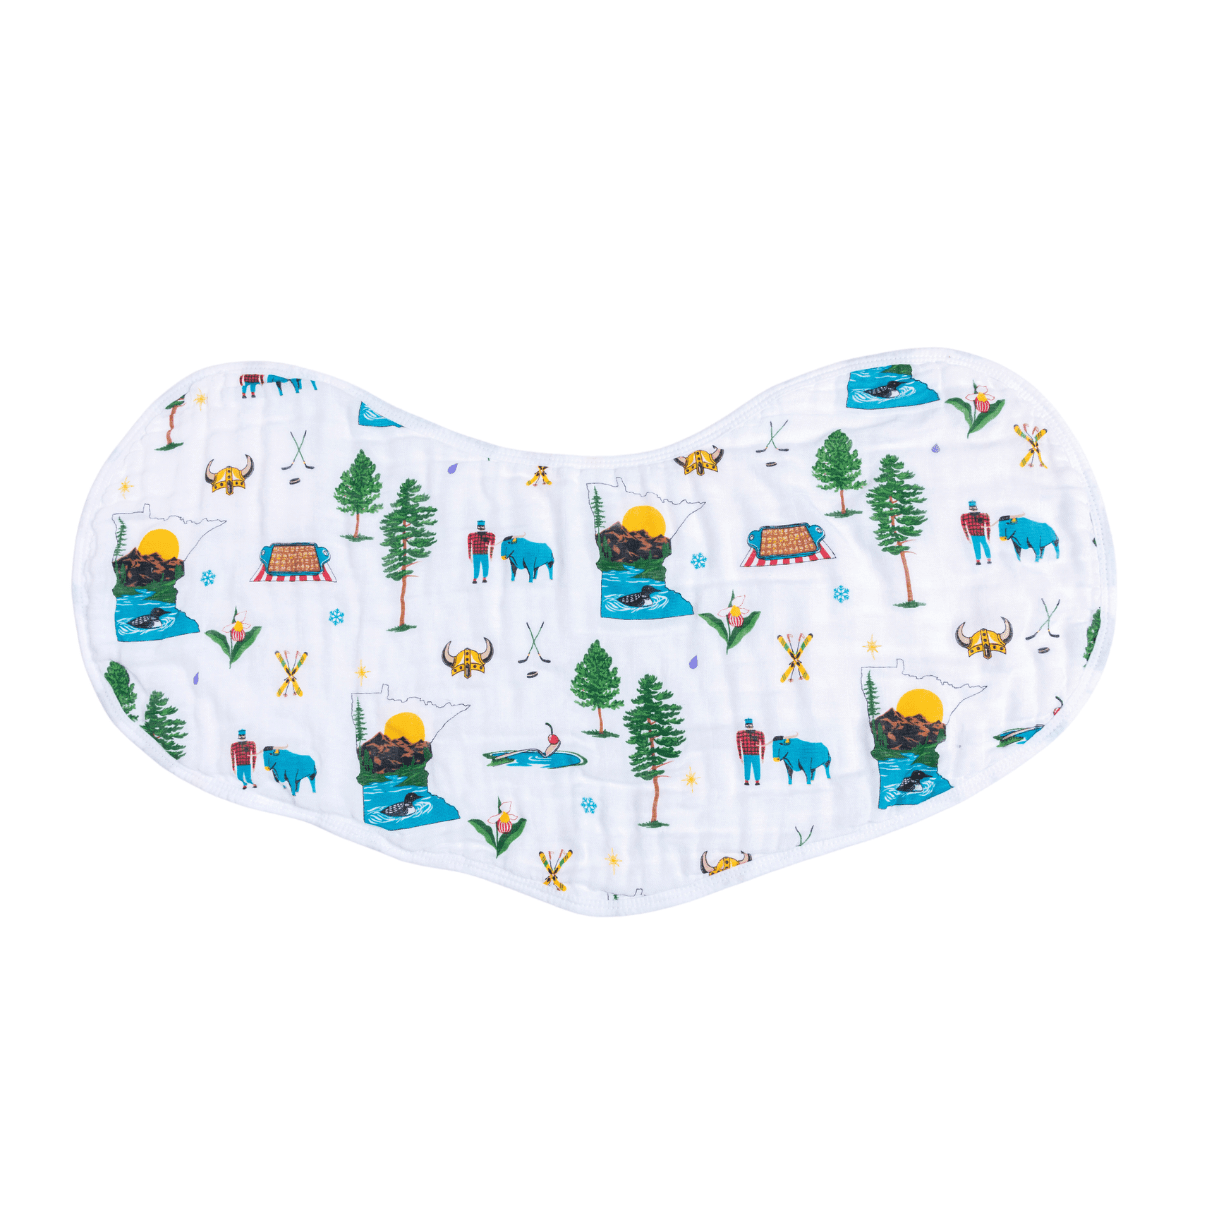 Baby burp cloth and bib set featuring a Minnesota state map design with landmarks and vibrant colors.